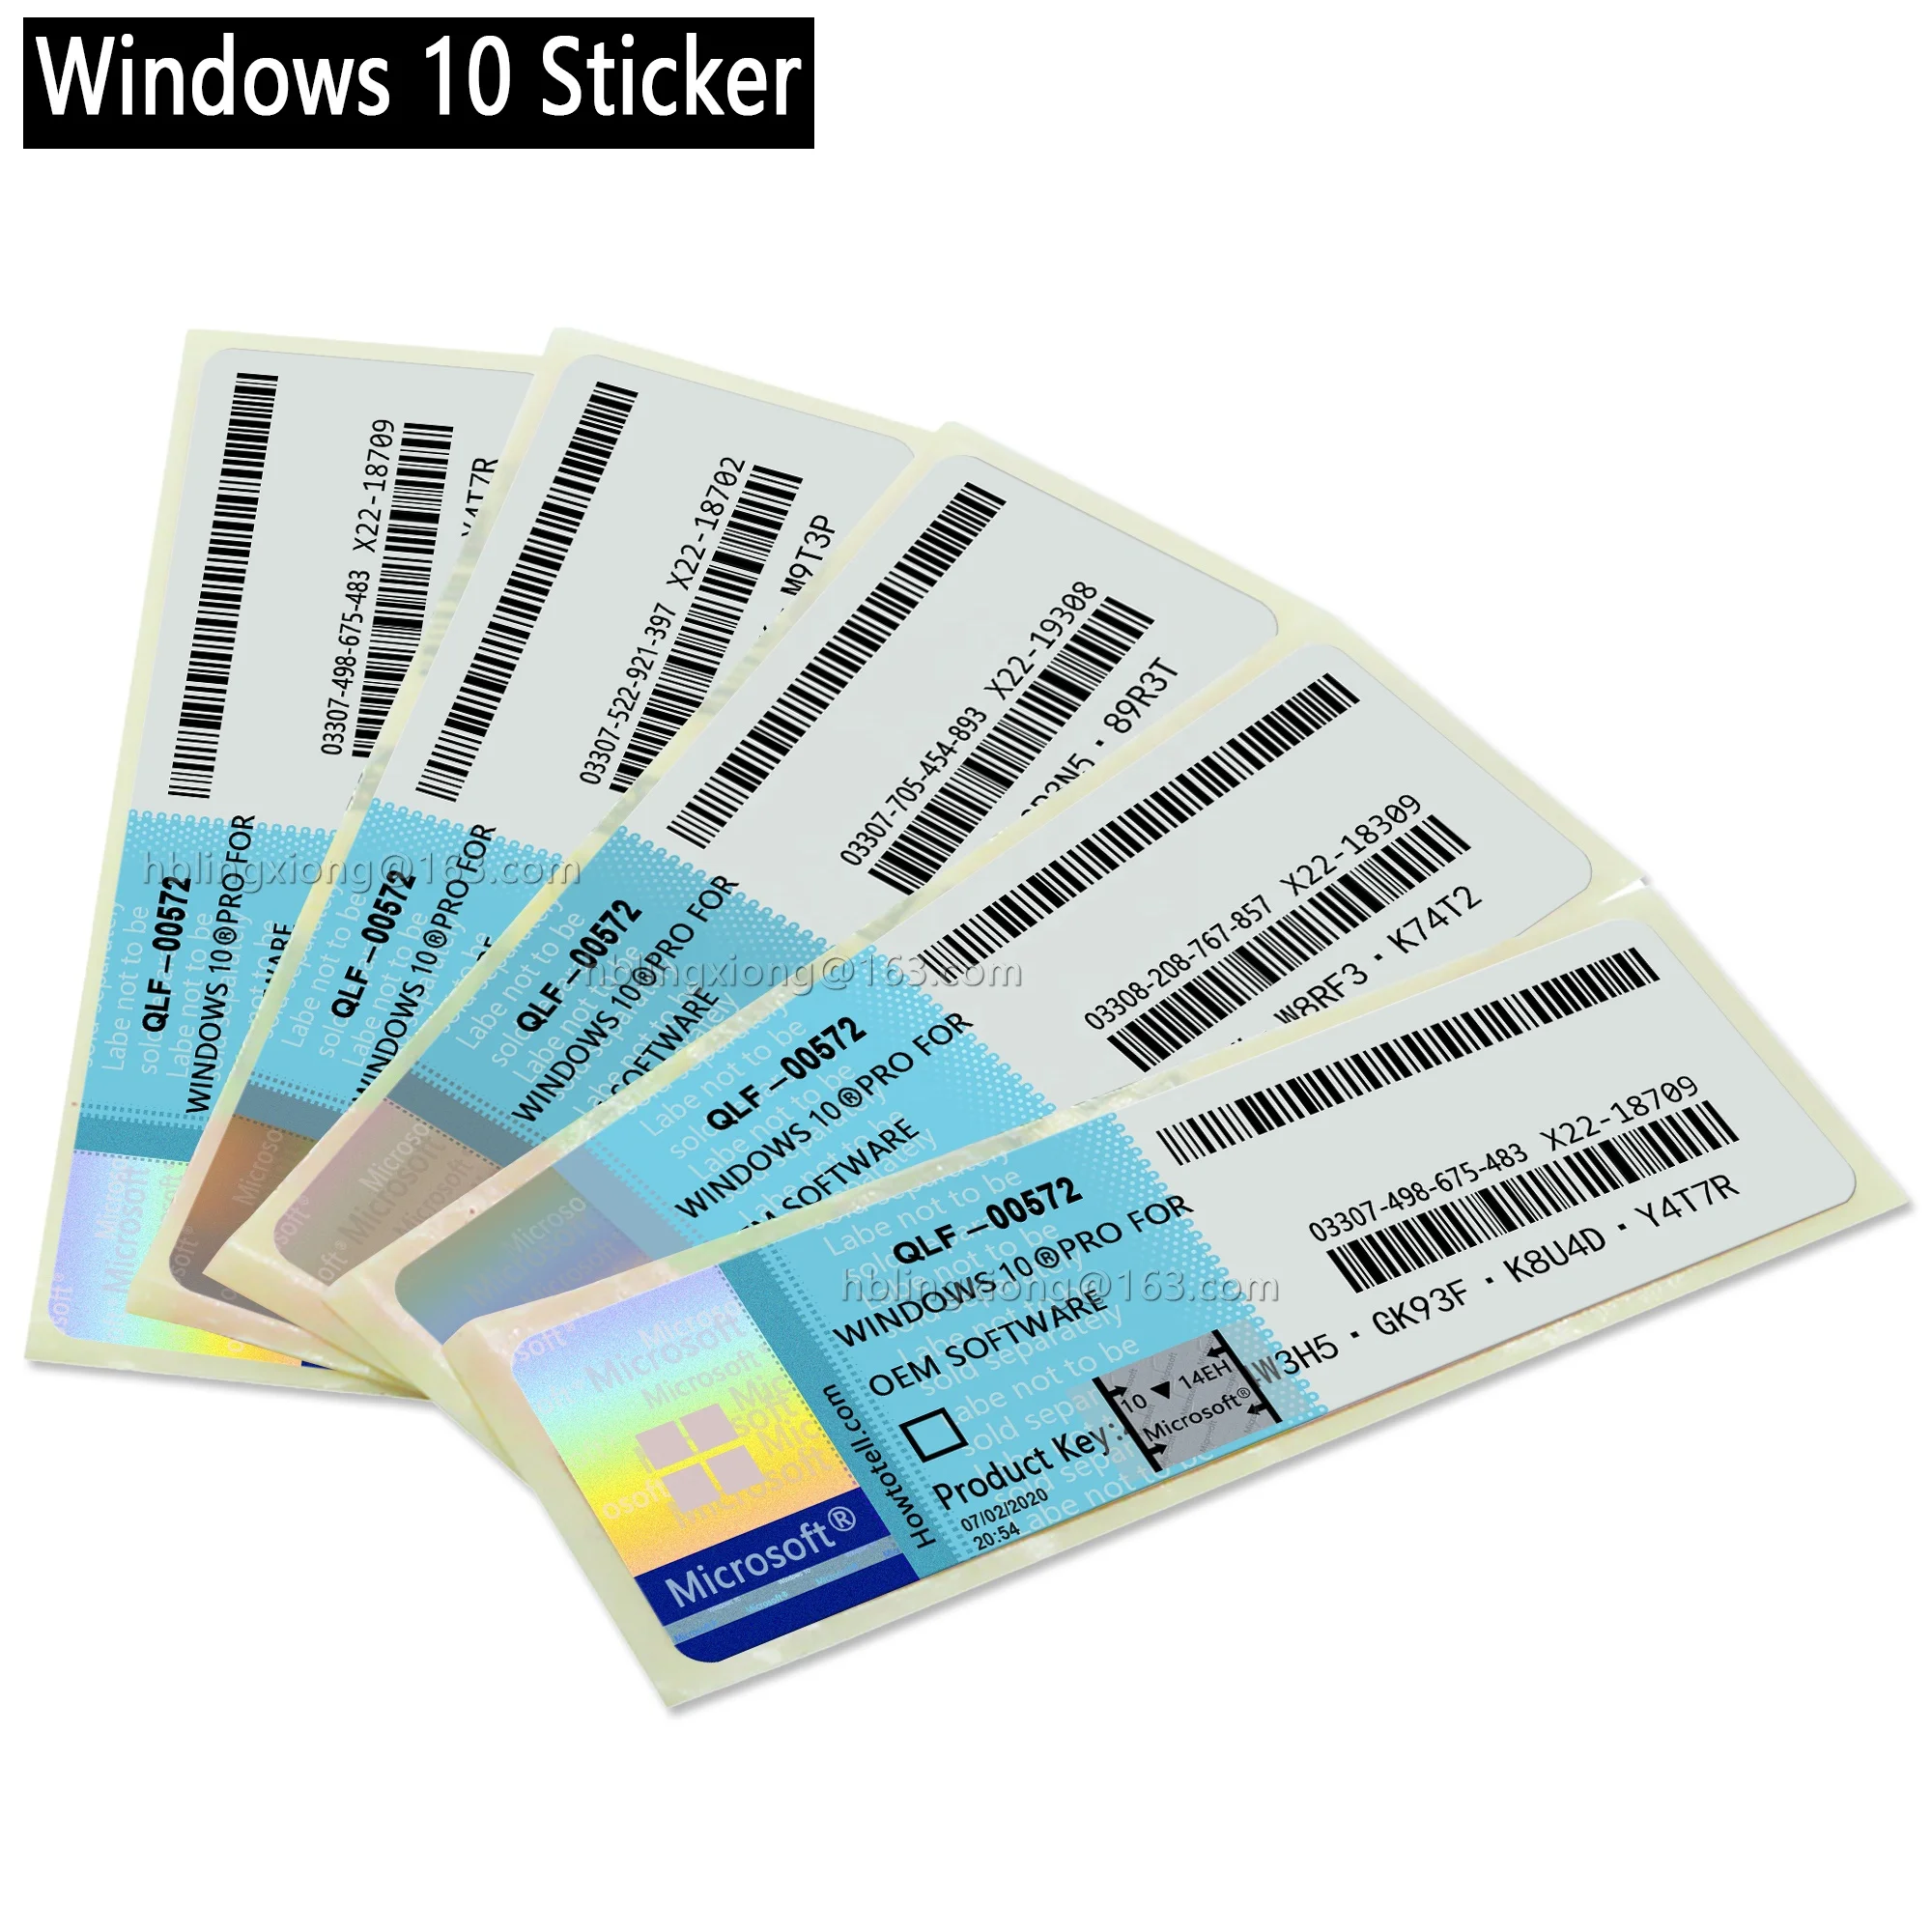 

Windows 10 Pro Sticker COA OEM Retail Key code label instant delivery by email global online activation license digital USB BOX